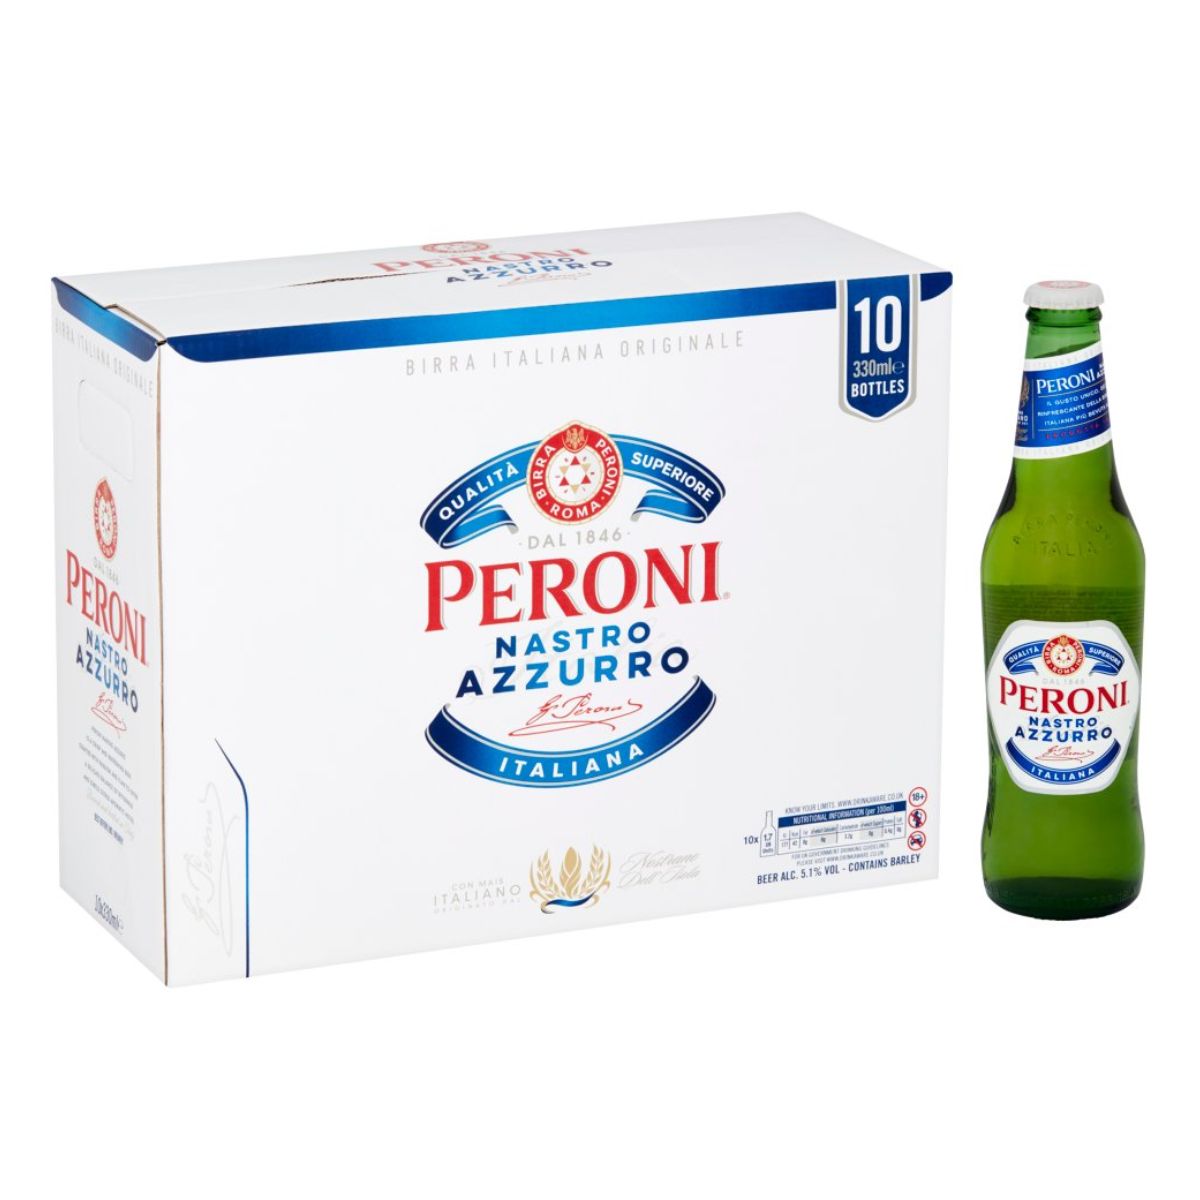 A bottle of Peroni - Nastro Azzurro (5.0% ABV) - 10 x 330ml with a box in front of it.